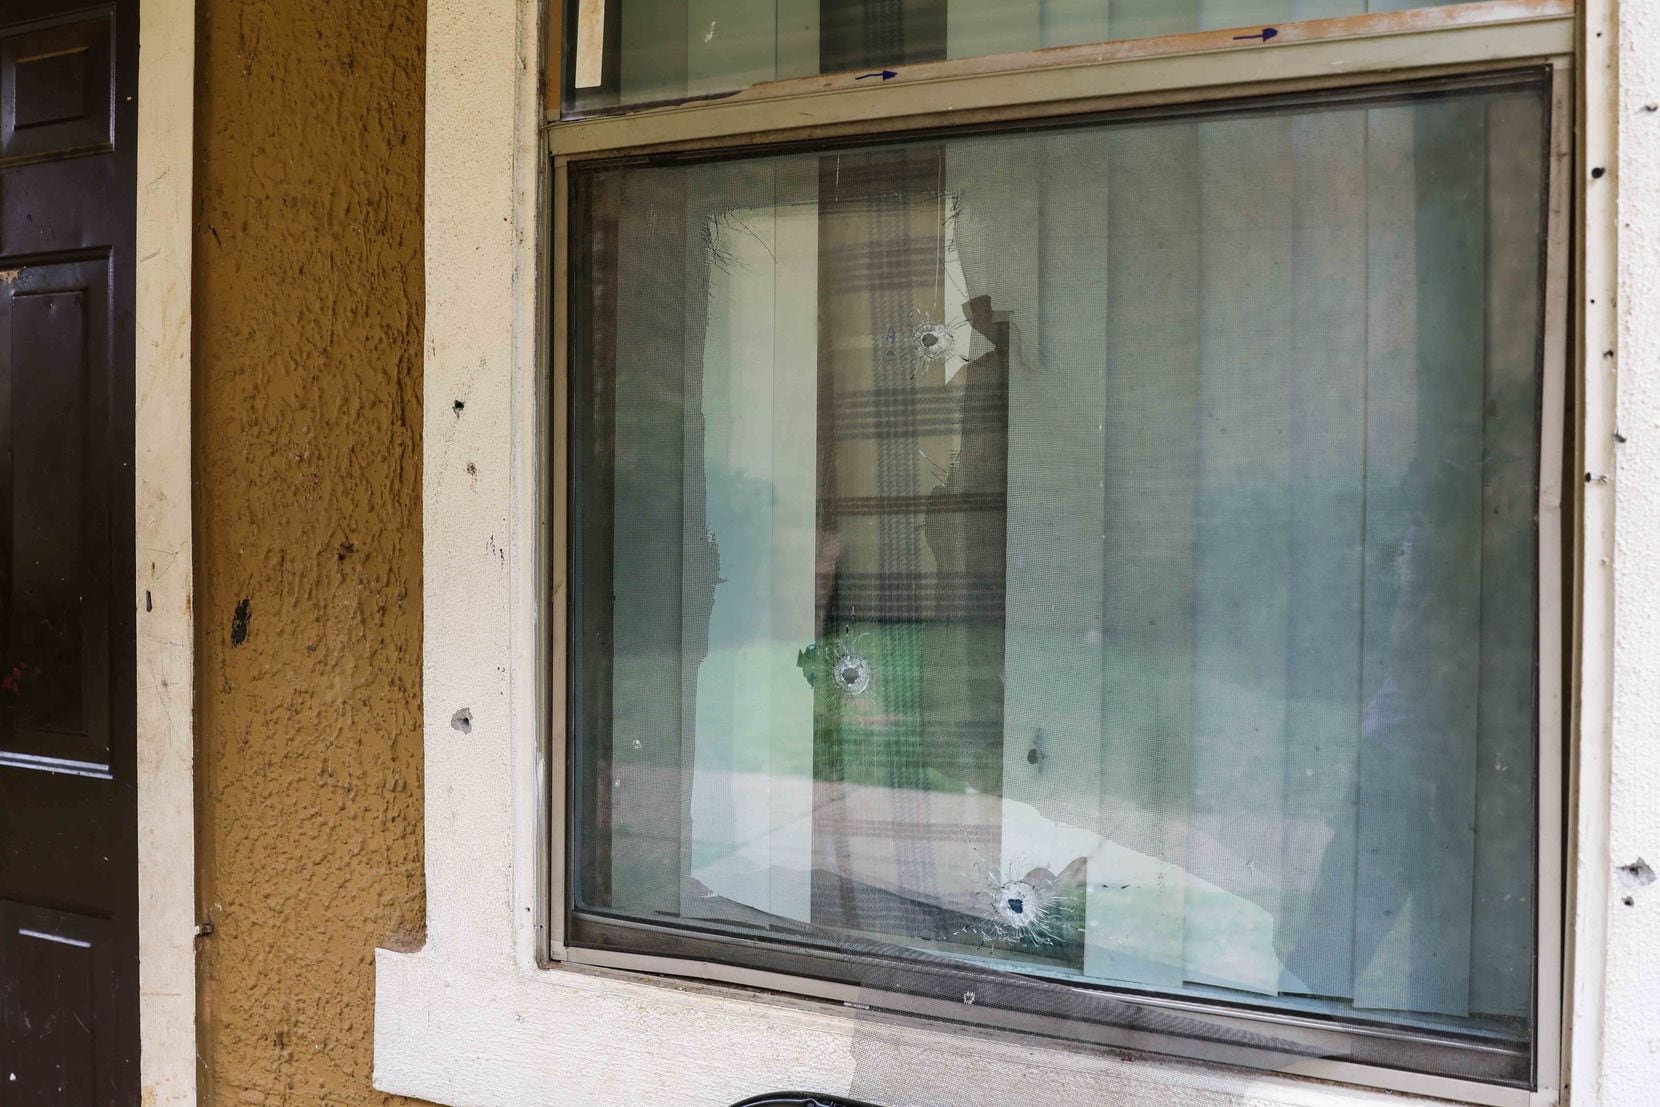 Holes made by gunshots in the window of the apartment where Hope Hensley, 20, died in the...